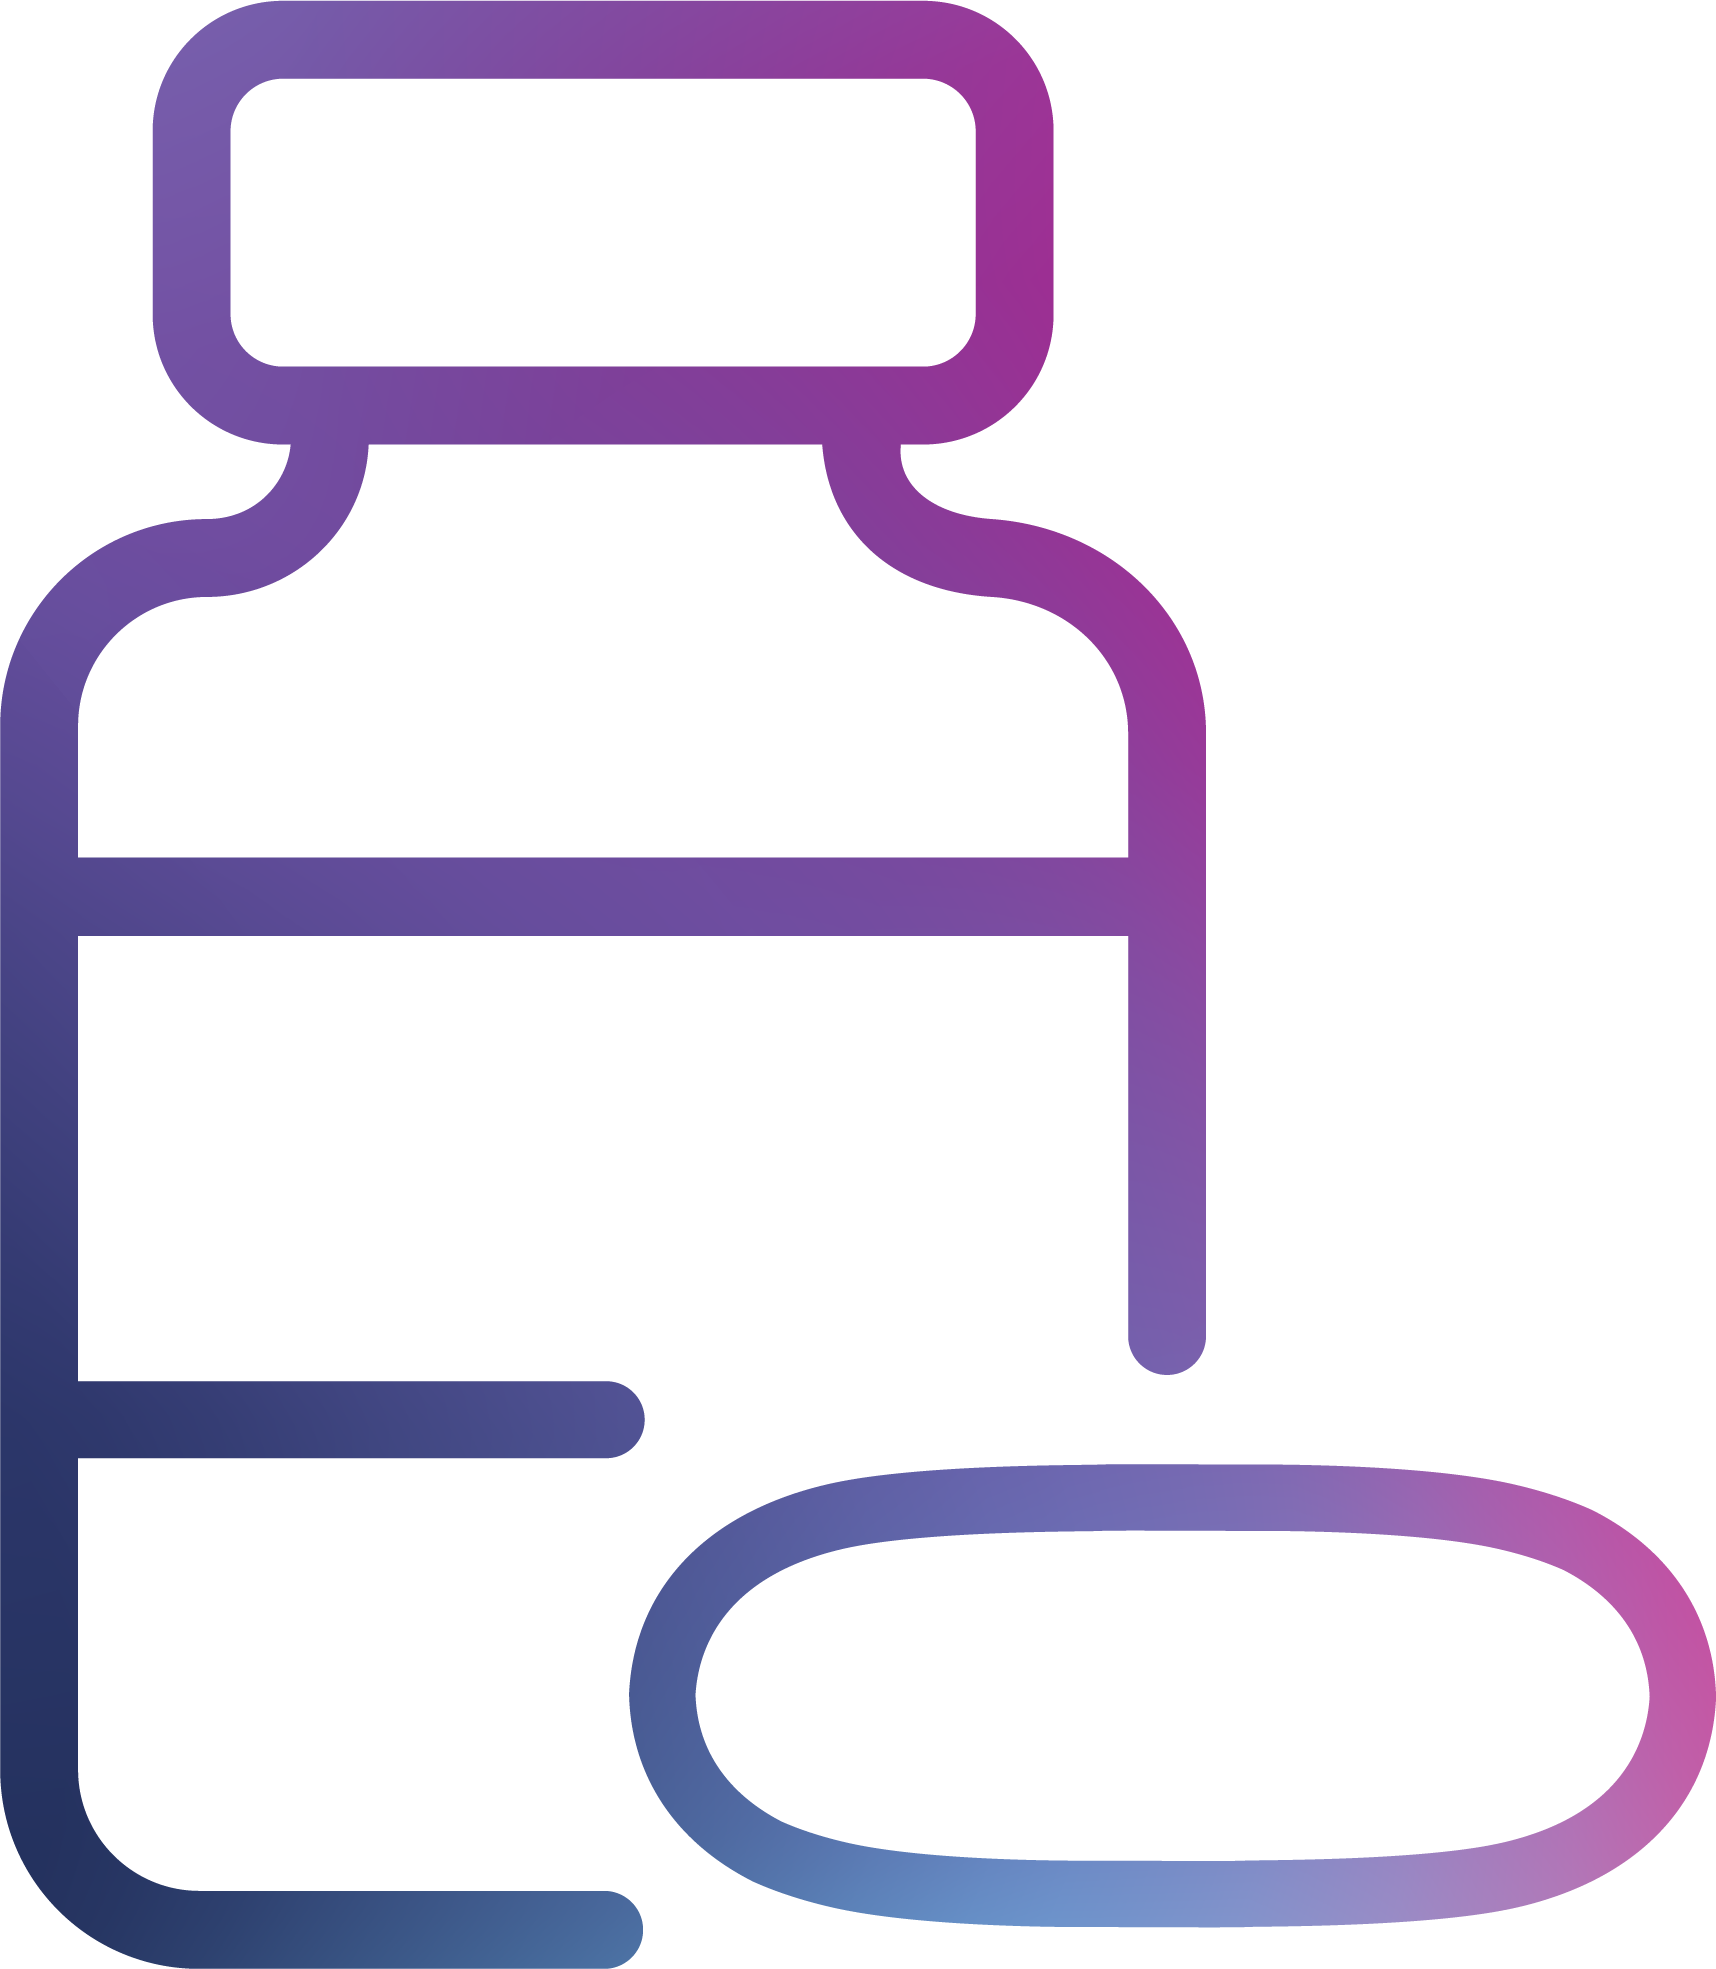 Bottle and capsule icon